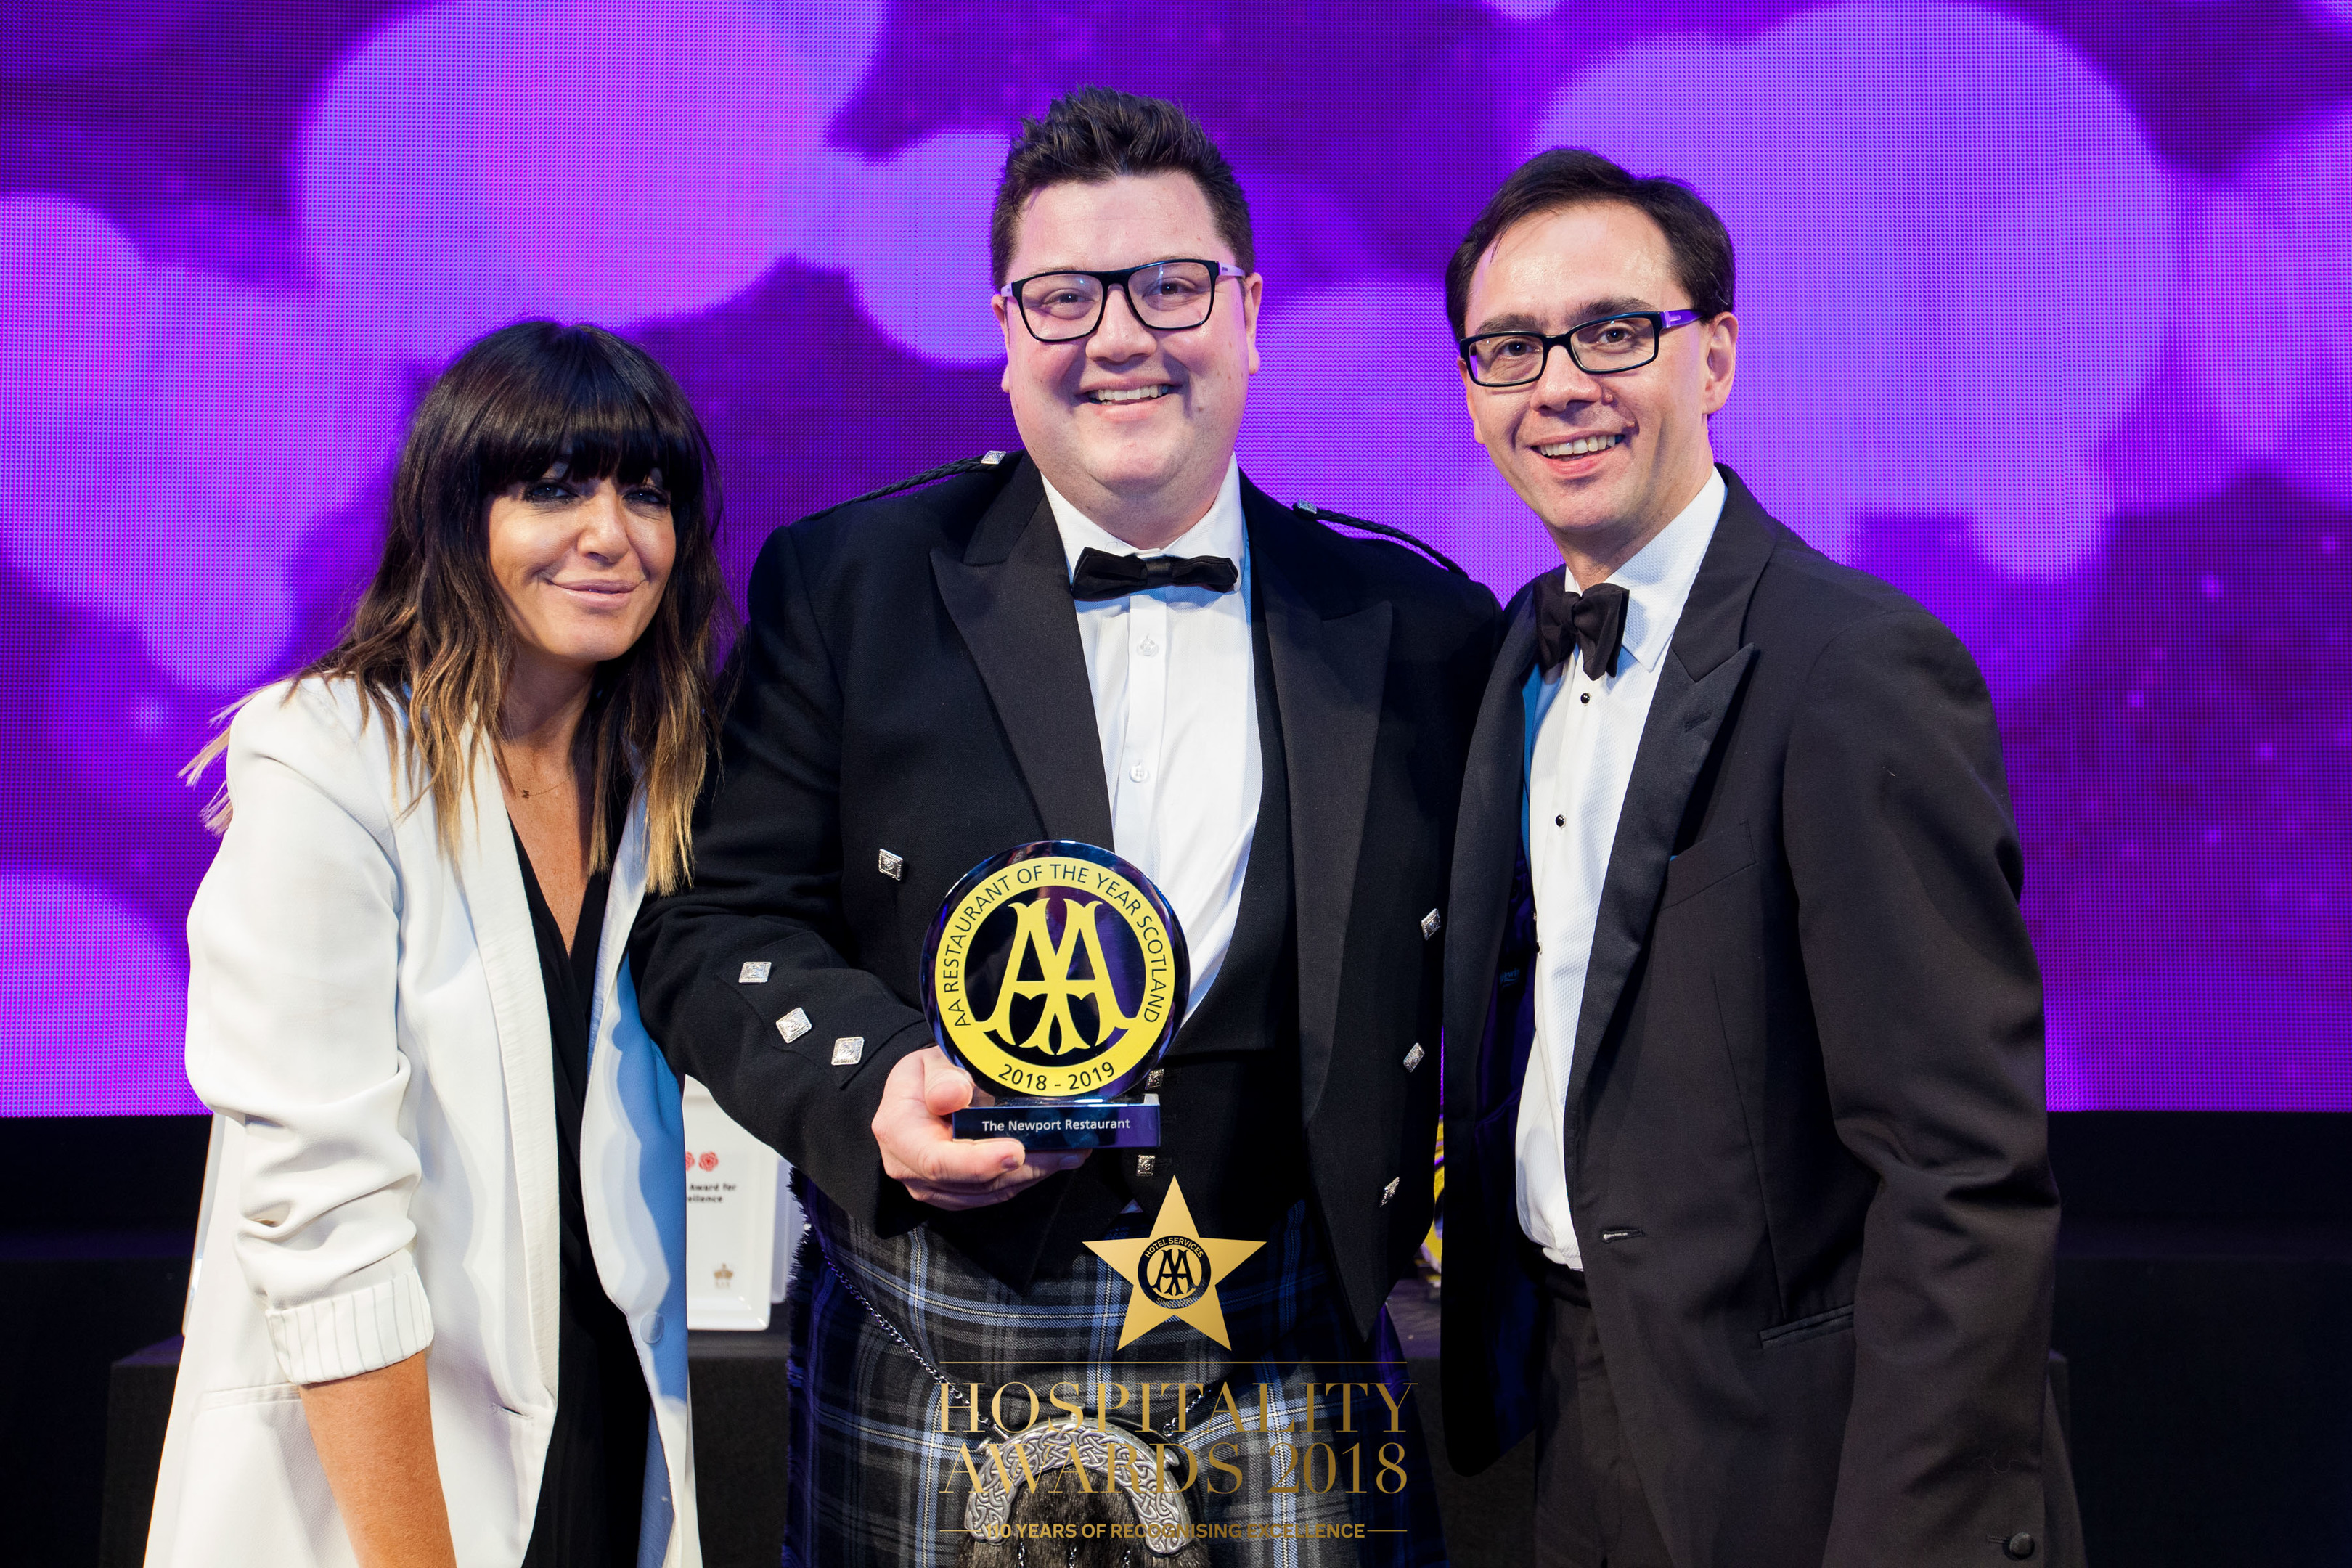 Jamie Scott of The Newport collects his award from Claudia Winkleman and Simon Numphud, managing director of AA Hotel & Hospitality Services.